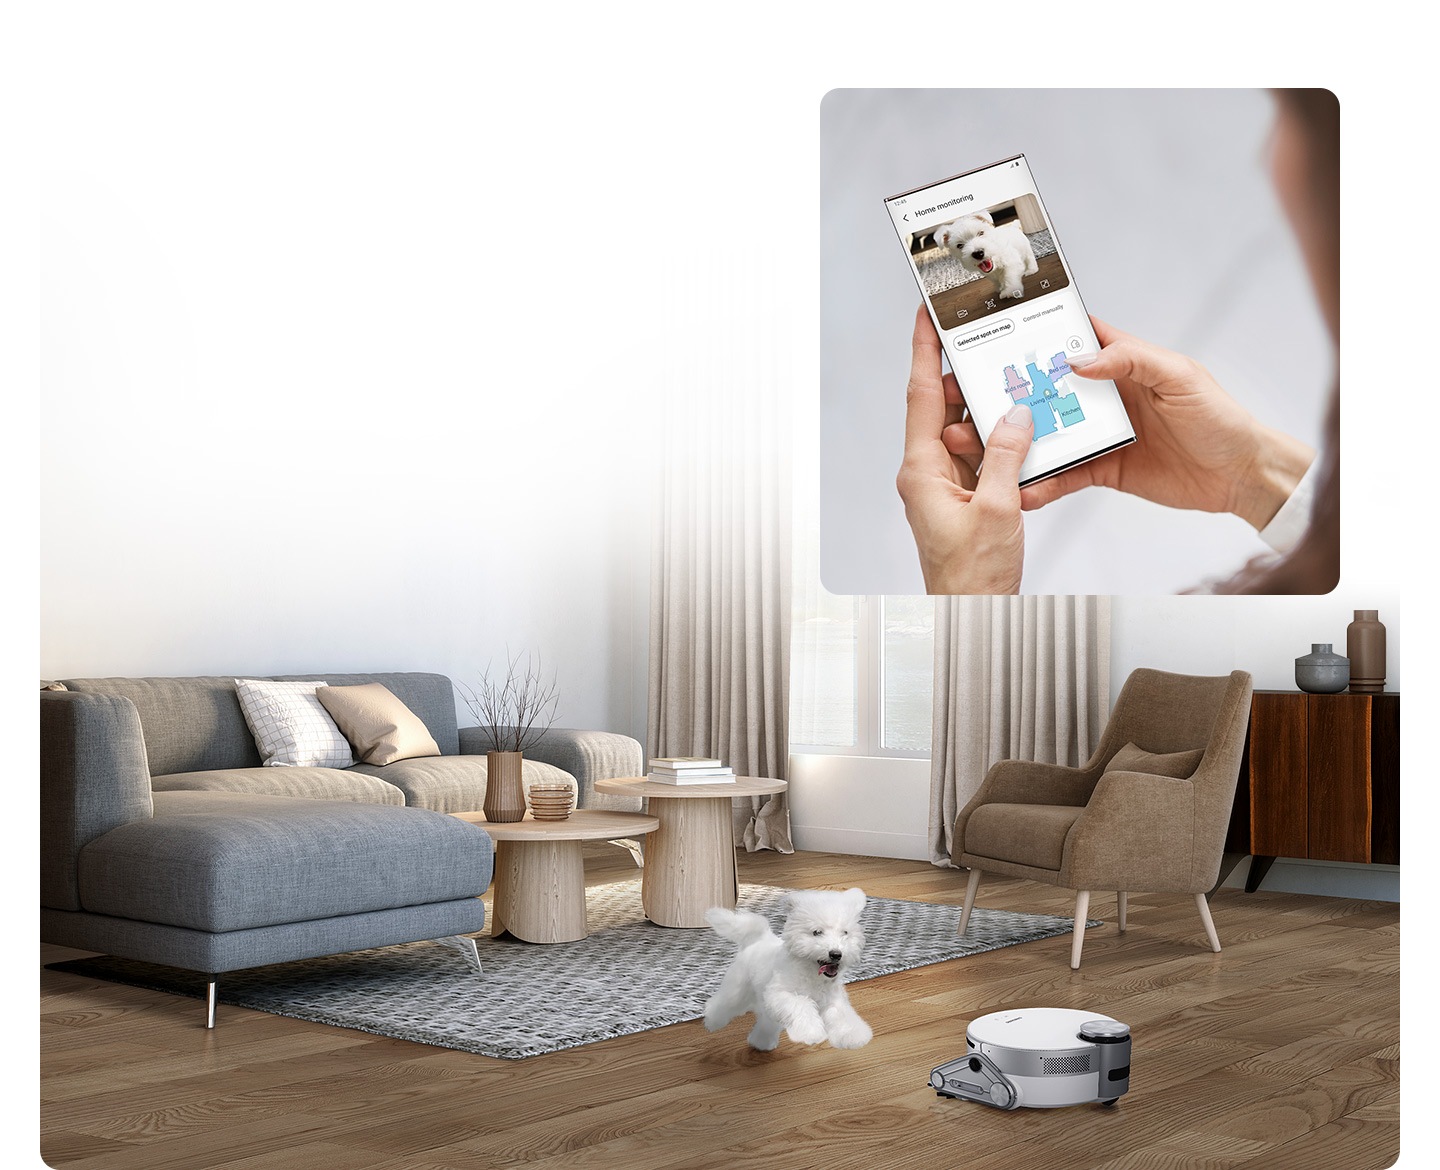 Check on your pets and home wherever you are. Jet Bot’s front camera can live stream real time video images using the SmartThings App*. And, in patrol mode, you can monitor the status of your home. It supports E2EE**, so video is securely encrypted and can only be viewed by an authorized user.